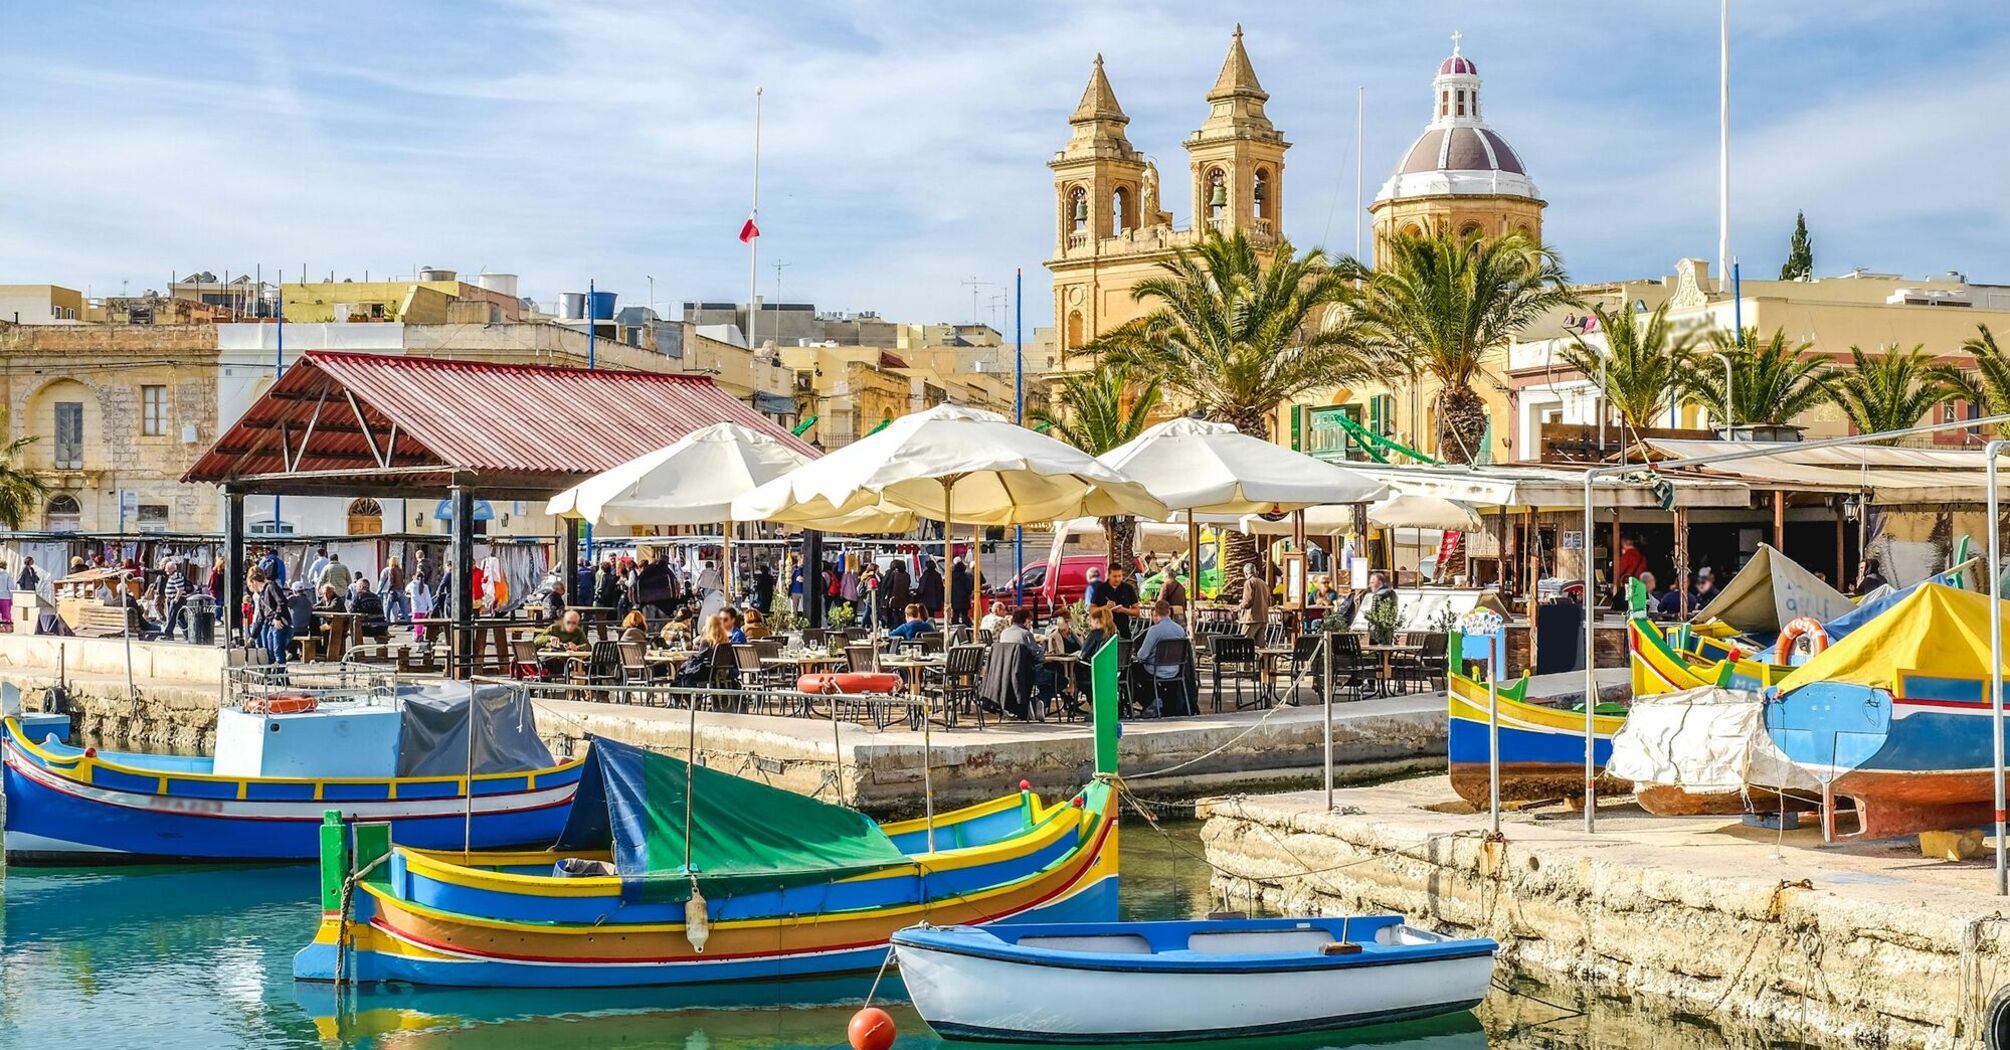 Vibrant waterfront scene in Malta with colorful boats and outdoor cafes